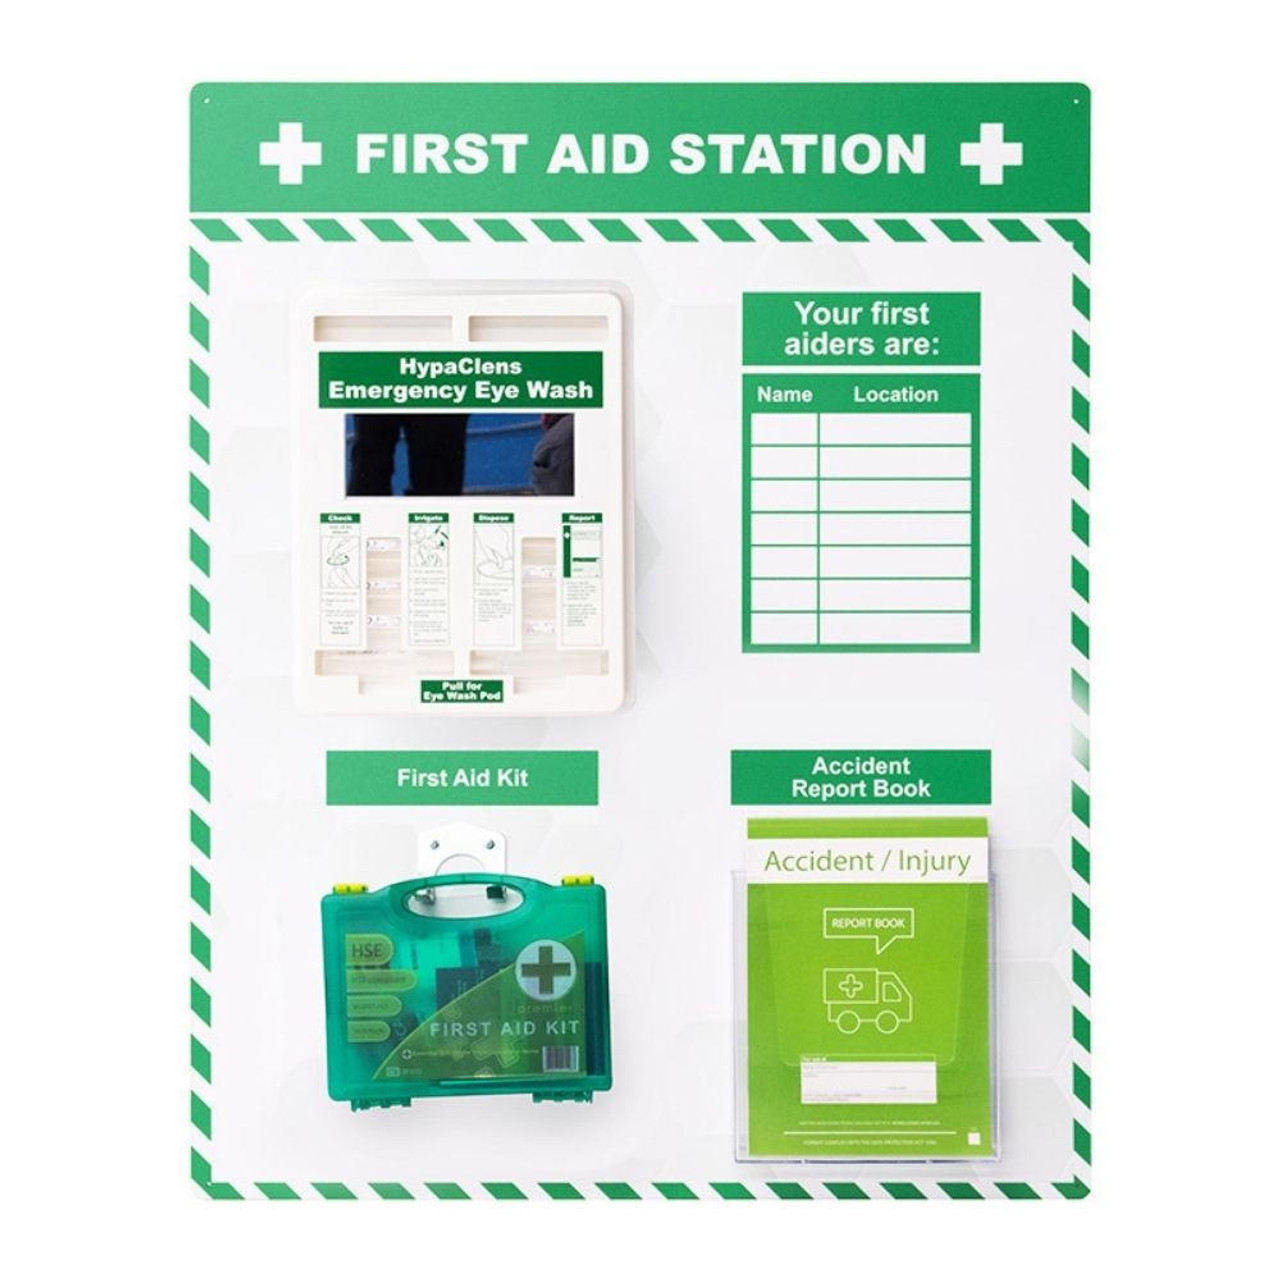 First Aid Station Inlcudes First Aid Kit Eyewash Dispenser Accident Book and Updateable First Aid Signage